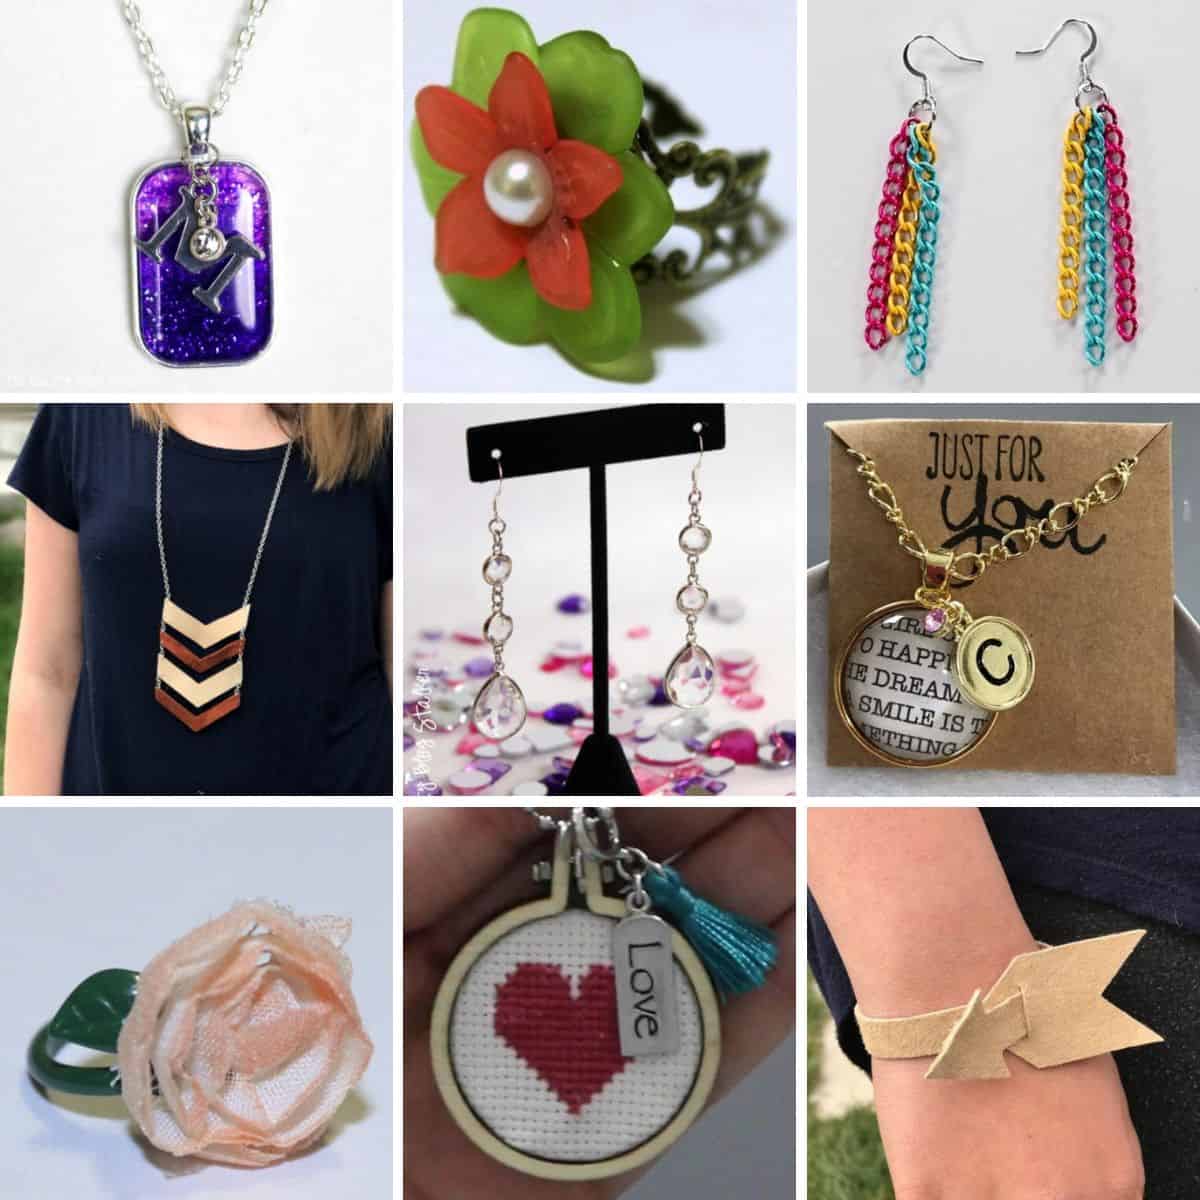 28 Beautiful and Unique Handmade Jewelry Ideas - The Crafty Blog Stalker